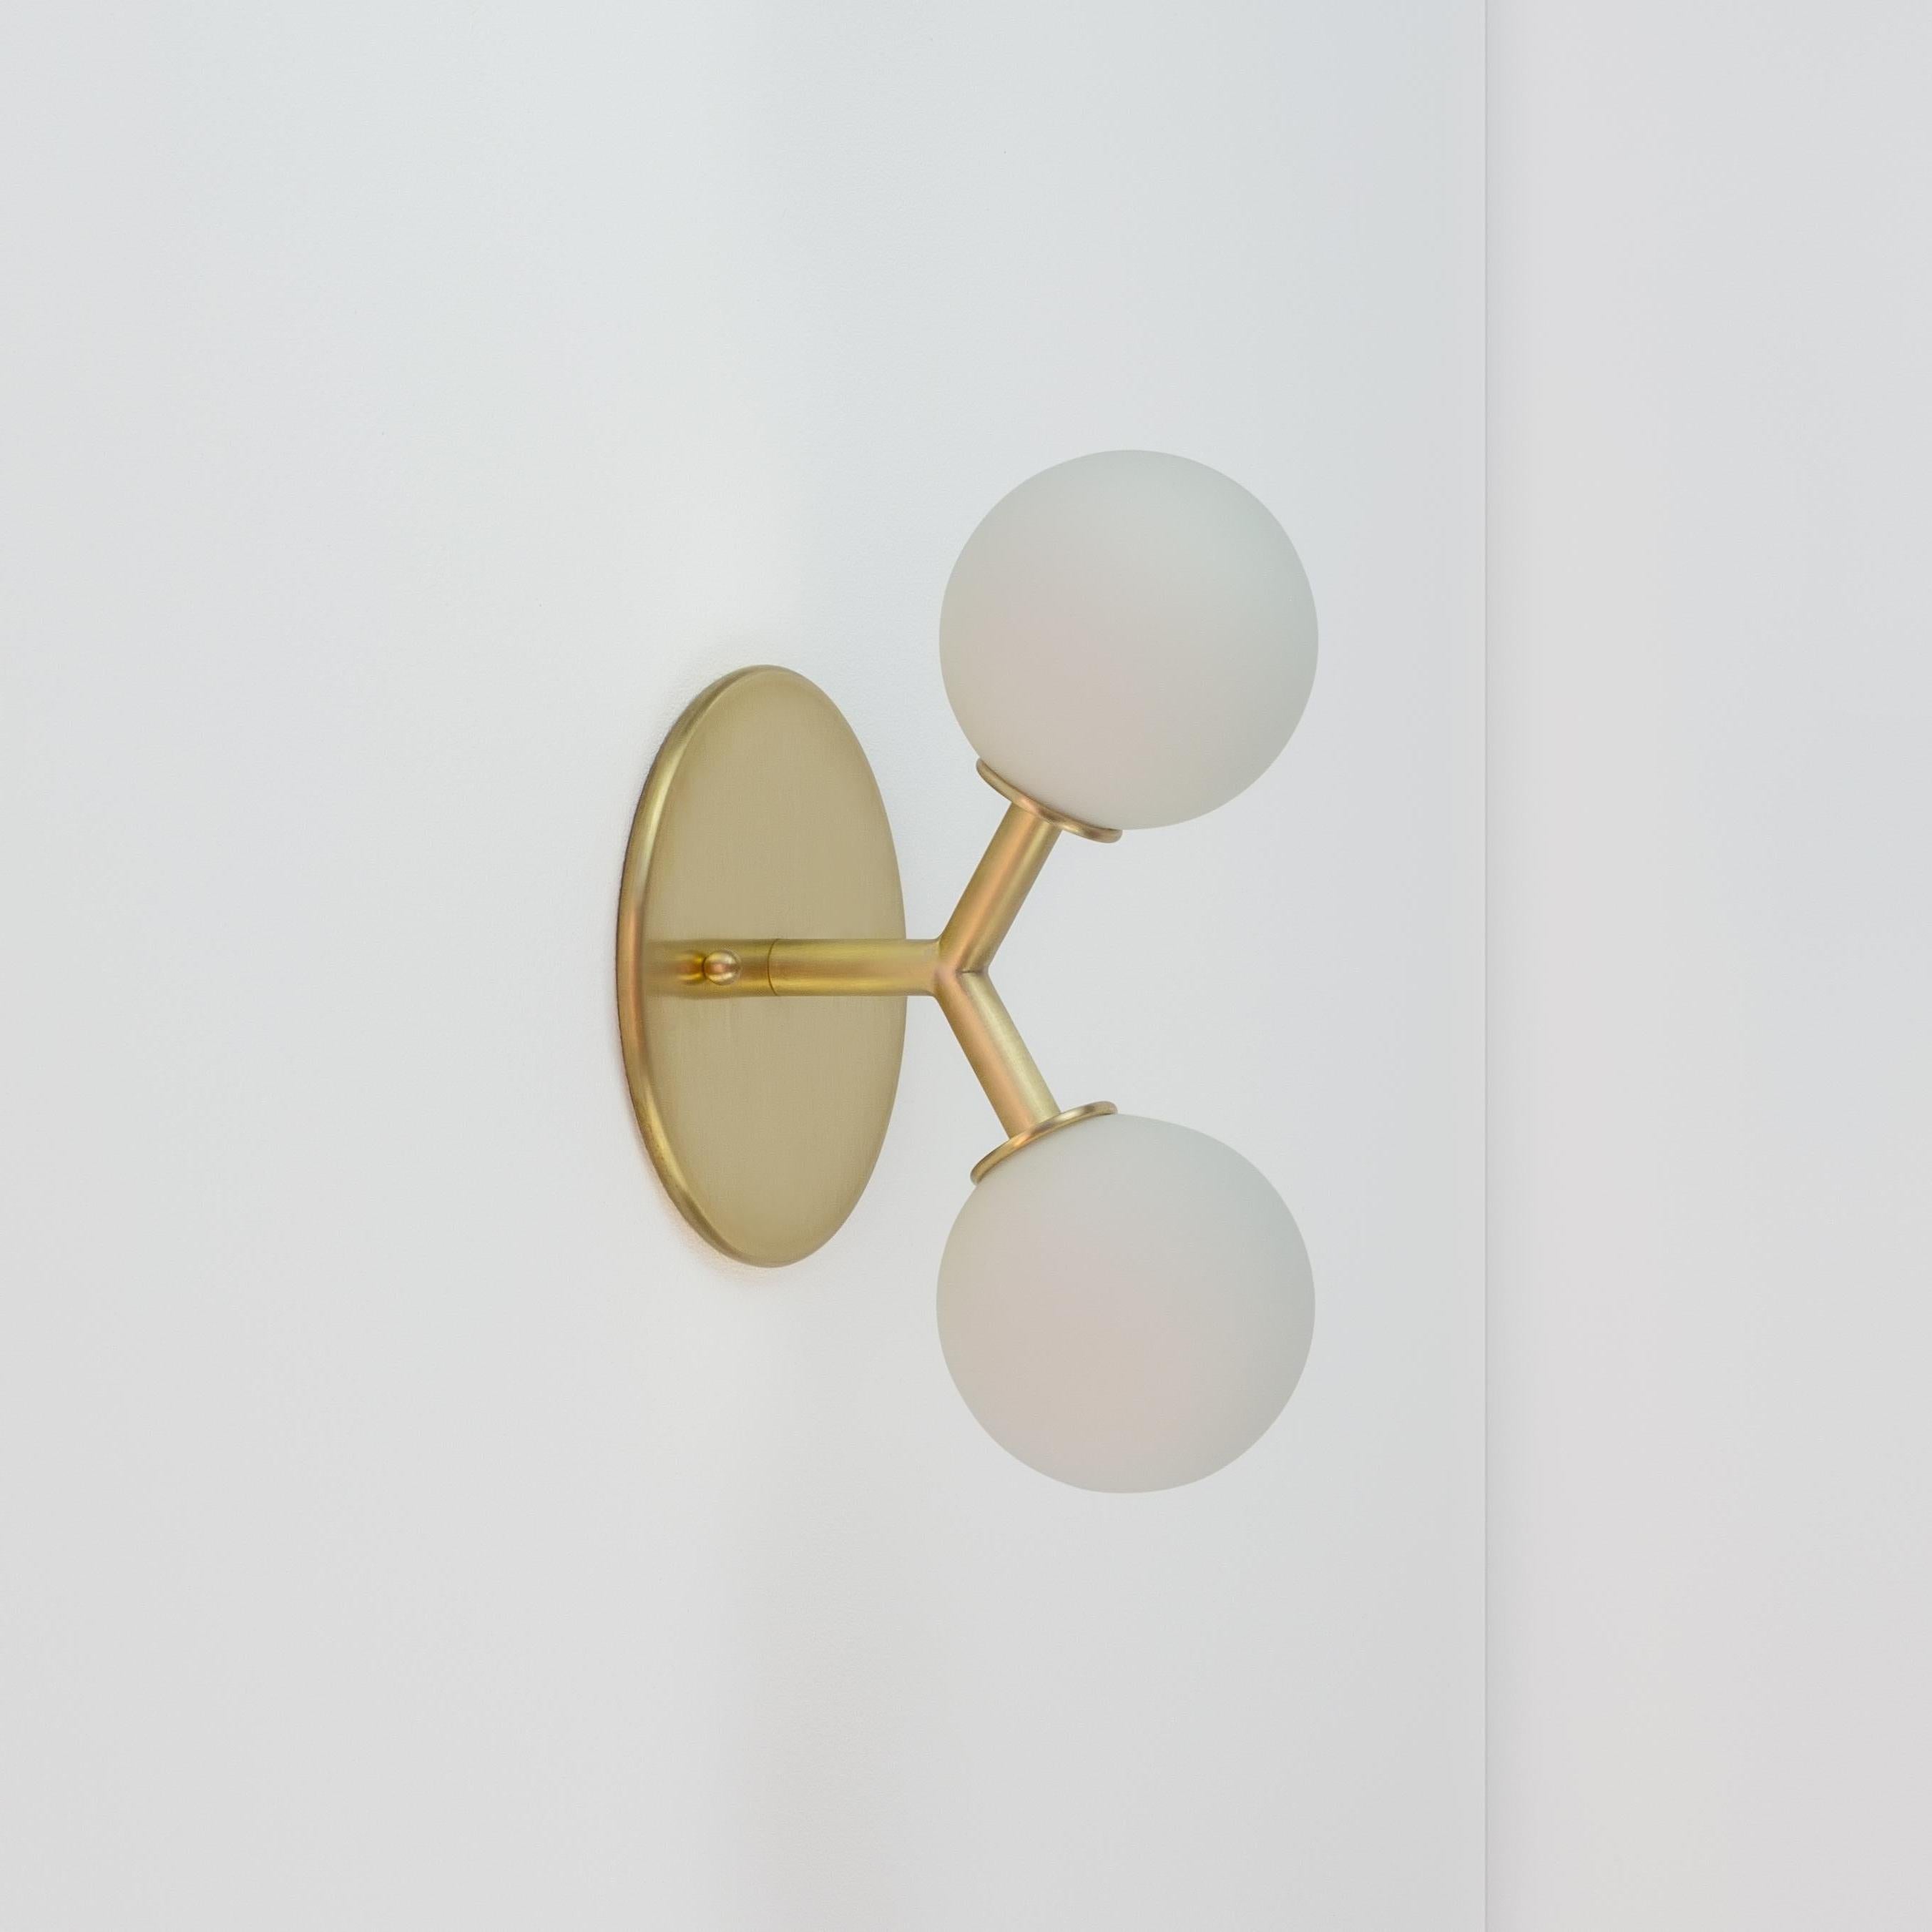 American Y Sconce by Research Lighting, Brass,  Made to Order For Sale